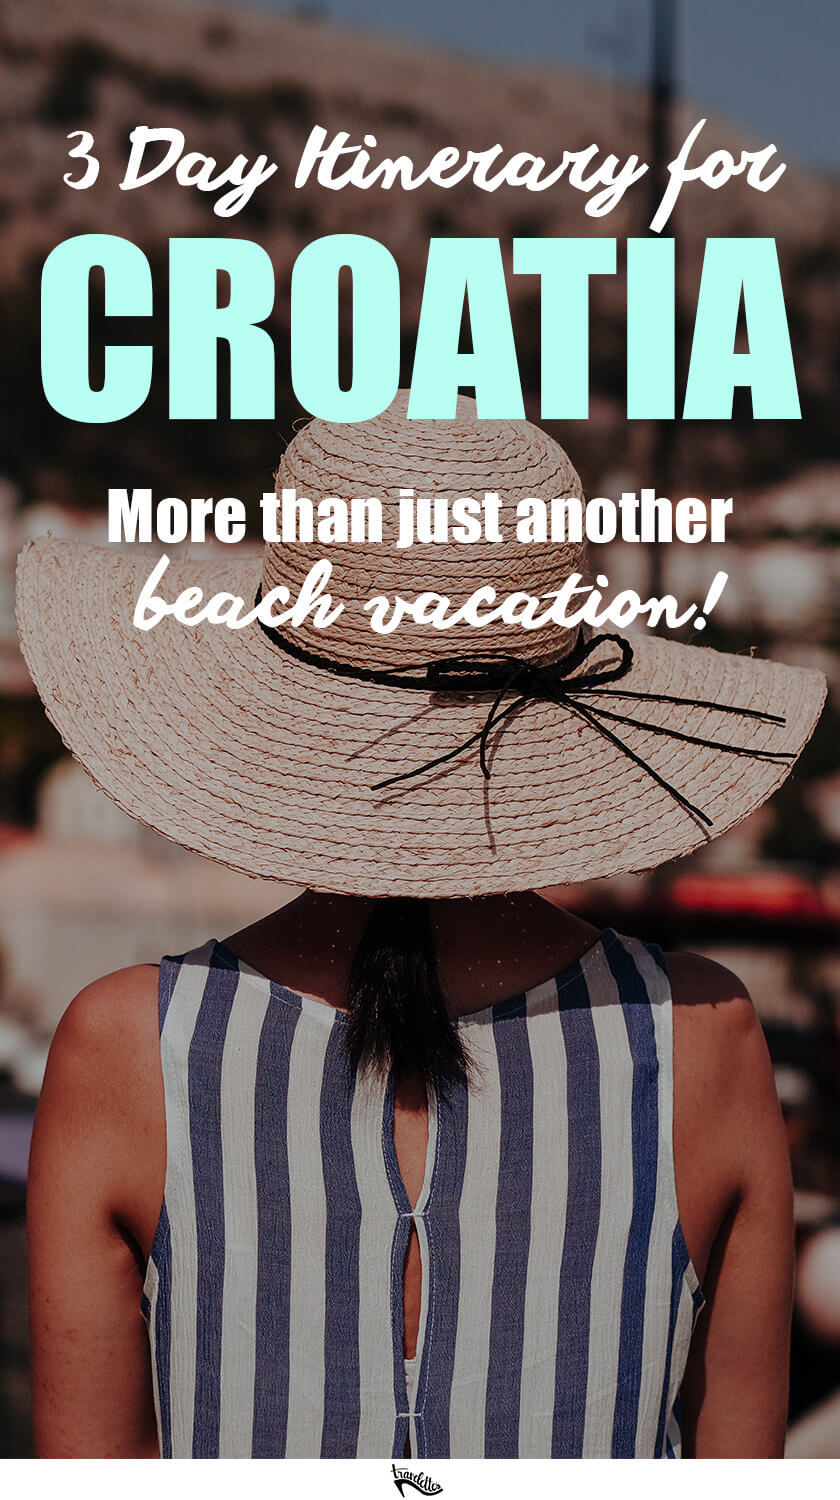 This short Croatia itinerary is a great addition to your Euro Trip - enough to get a taste of what Croatia has to offer & more than just another beach vacation!